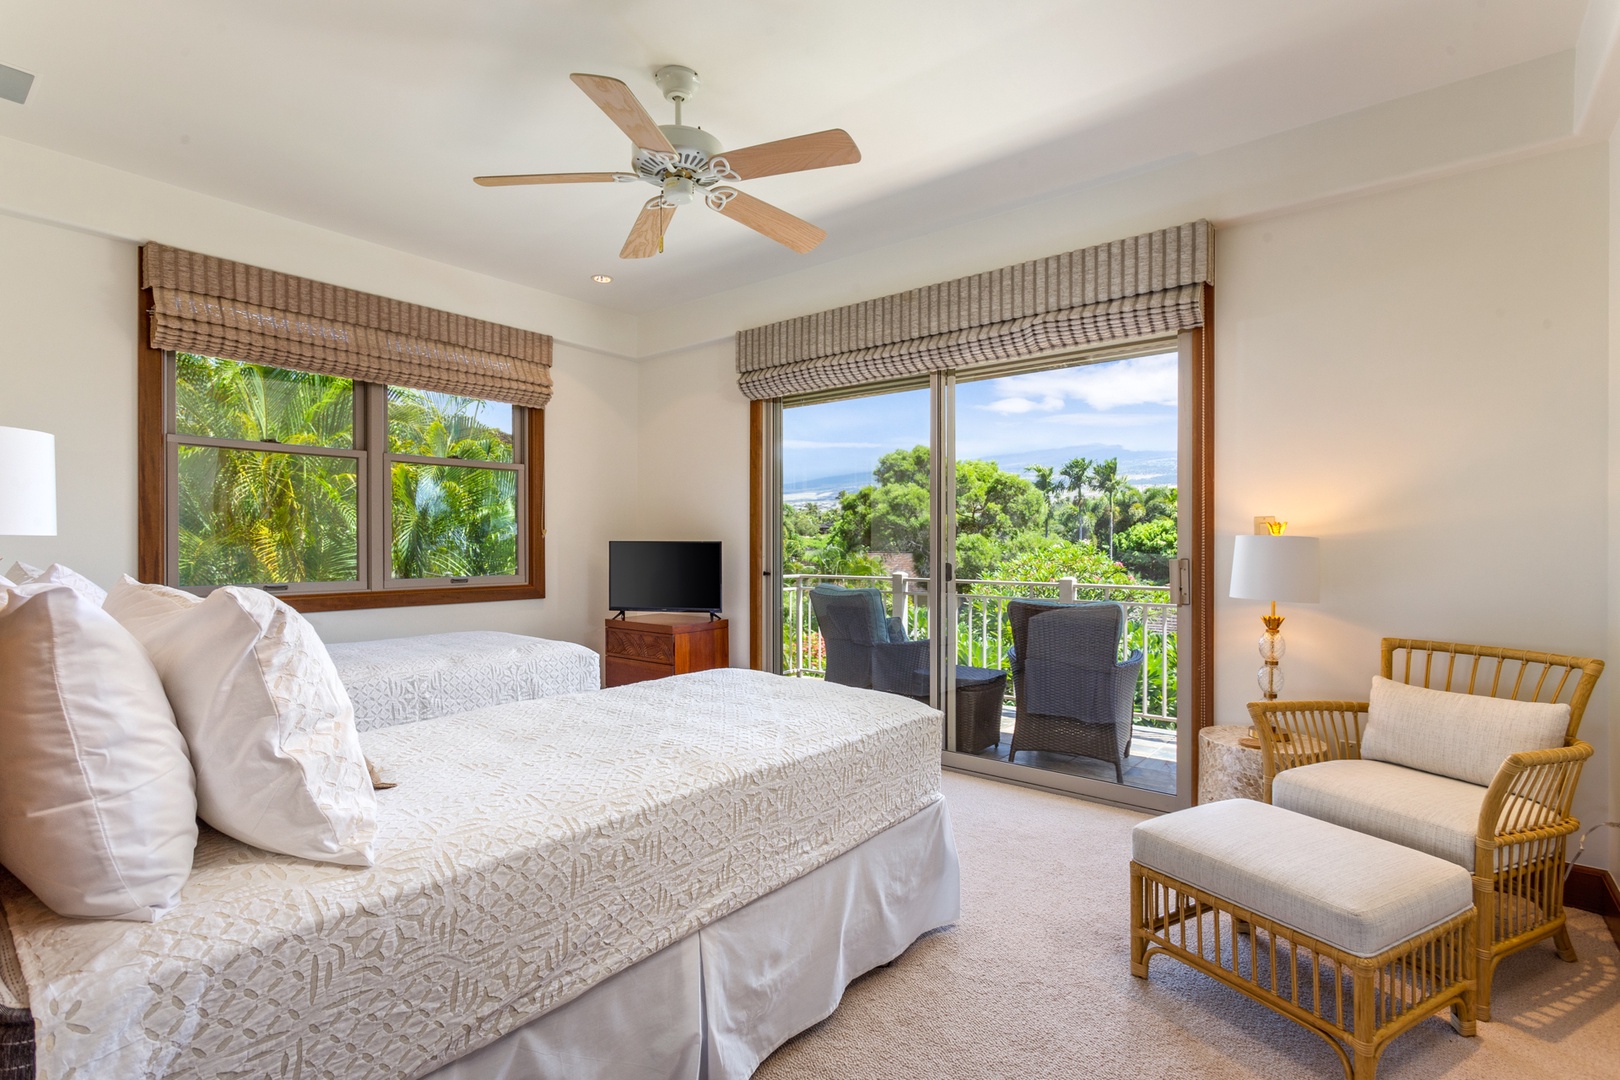 Kailua Kona Vacation Rentals, 3BD Ka'Ulu Villa (129D) at Four Seasons Resort at Hualalai - Third bedroom (upstairs) with two twin beds (can convert to a king upon request), private balcony and adjacent bath.